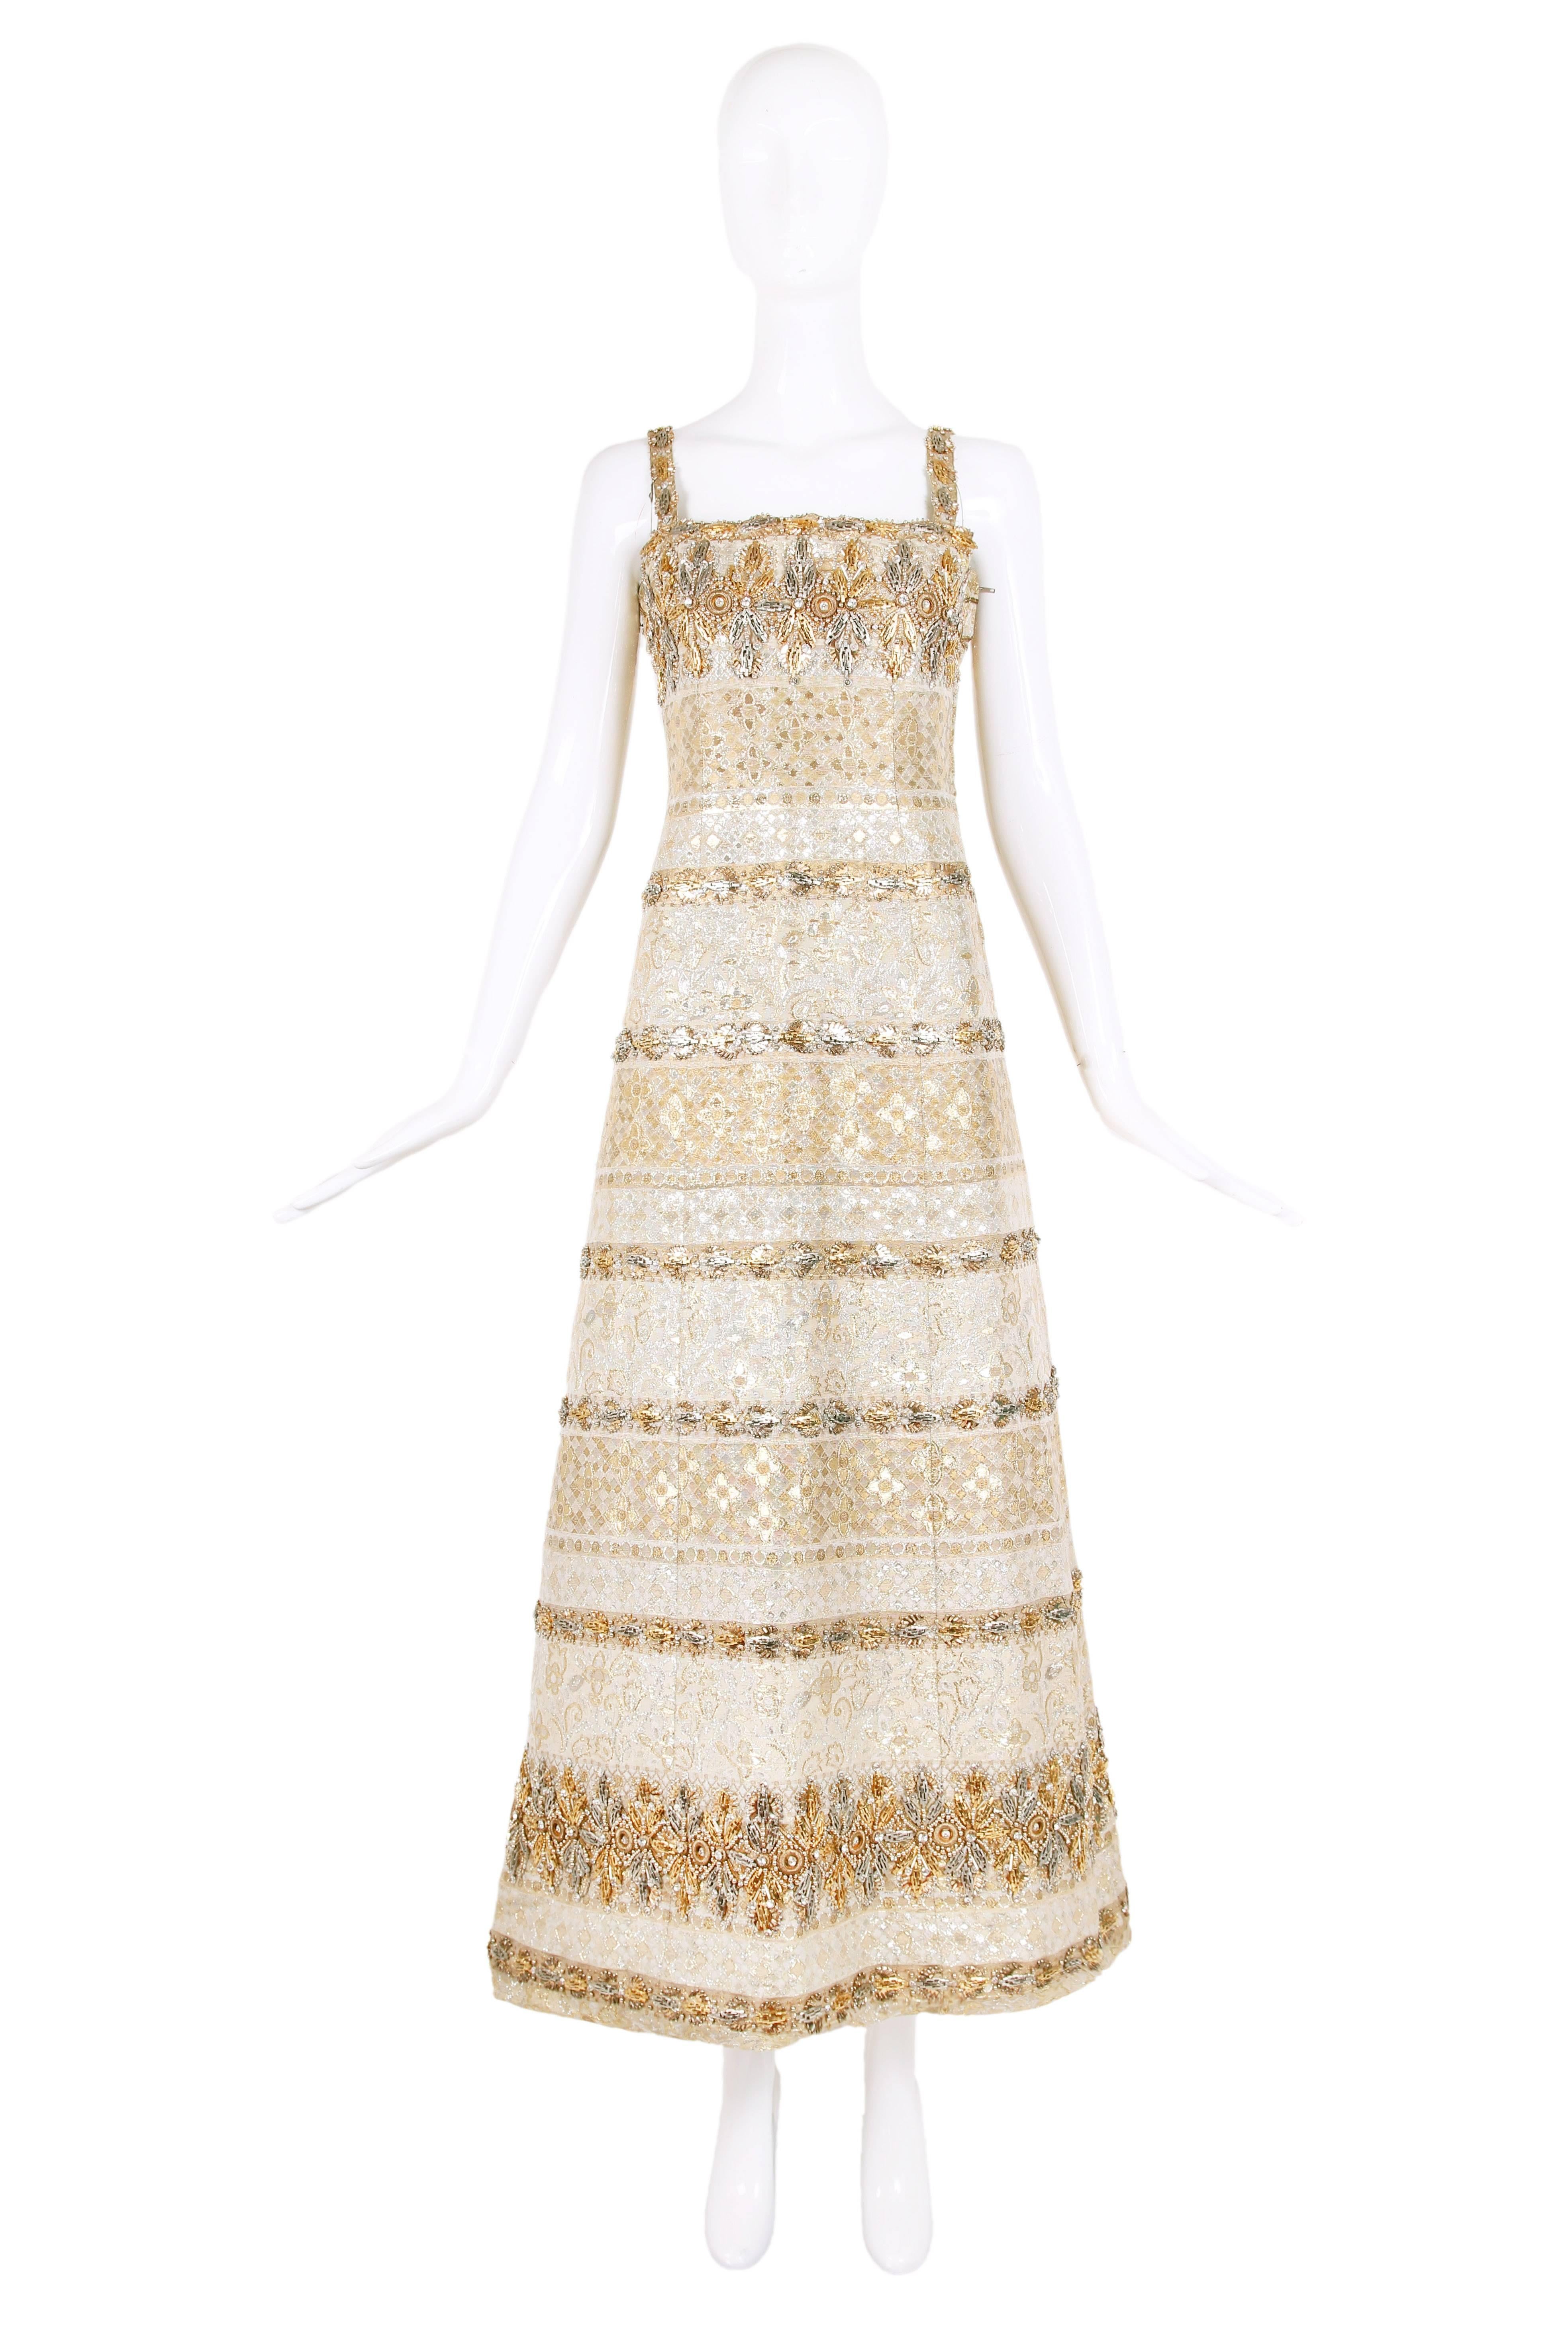 Circa 1966 Pierre Balmain haute couture evening gown in a gold and silver lurex brocade with elaborate embellishments. In excellent condition - some beads missing here and there. No size tag - please see measurements.
MEASUREMENTS:
Bust -